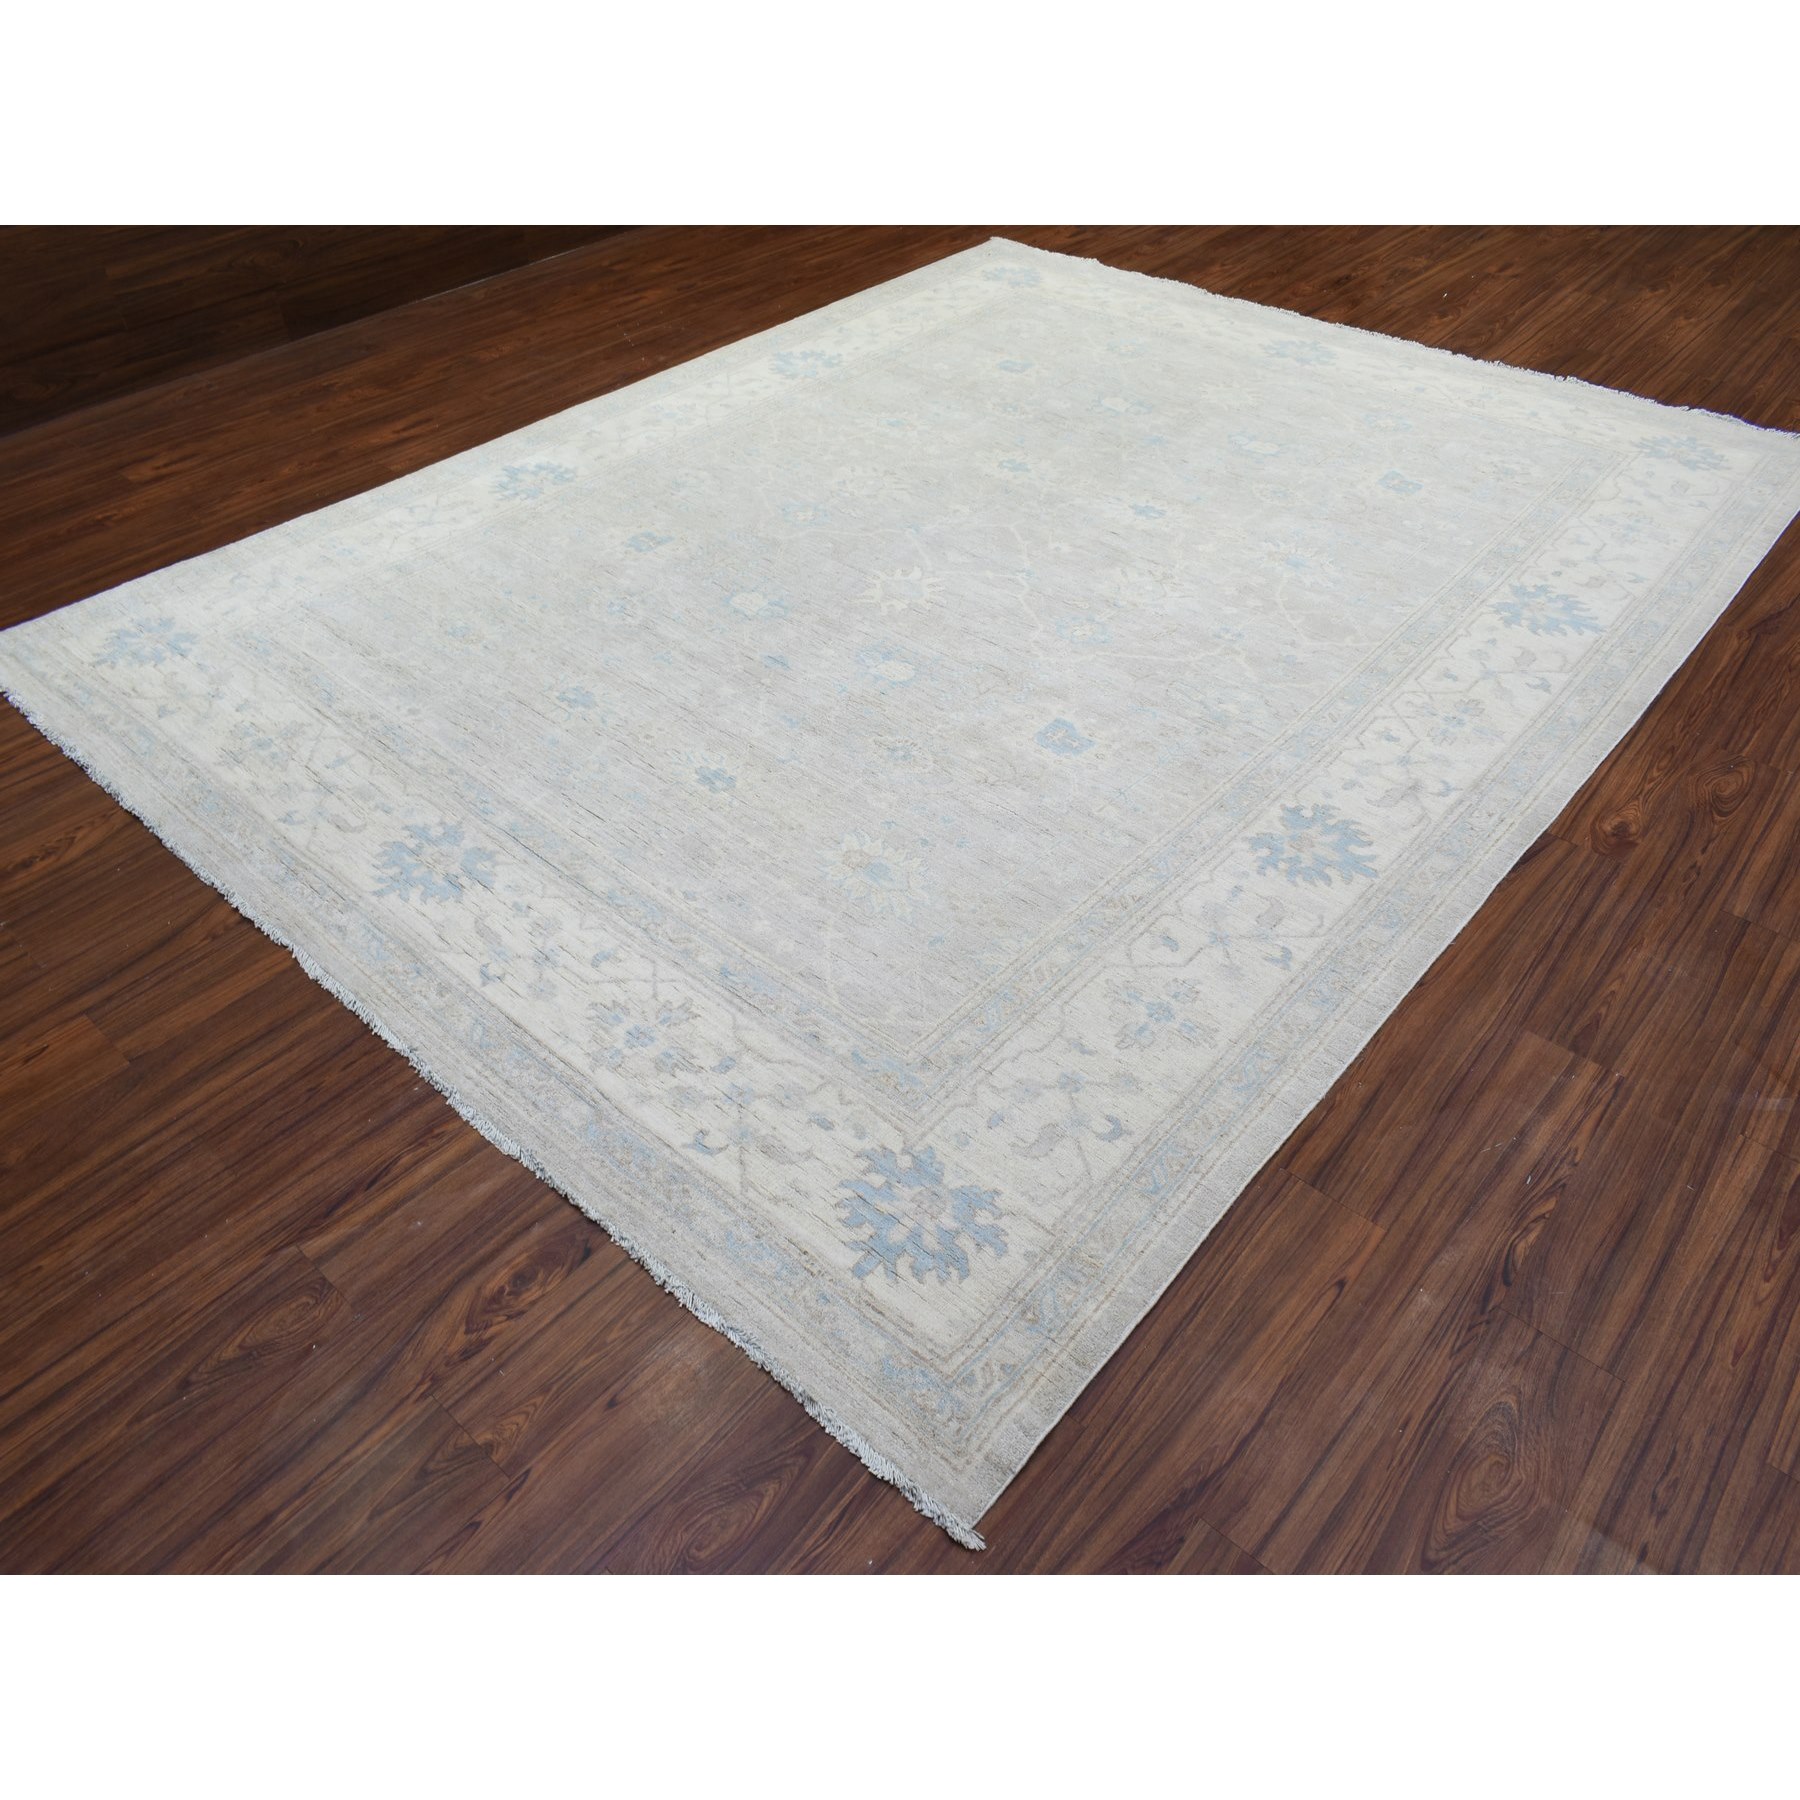 9'x11'6" Light Taupe, Hand Woven White Wash Peshawar with All Over Floral Motifs, Natural Dyes Soft Wool, Oriental Rug 